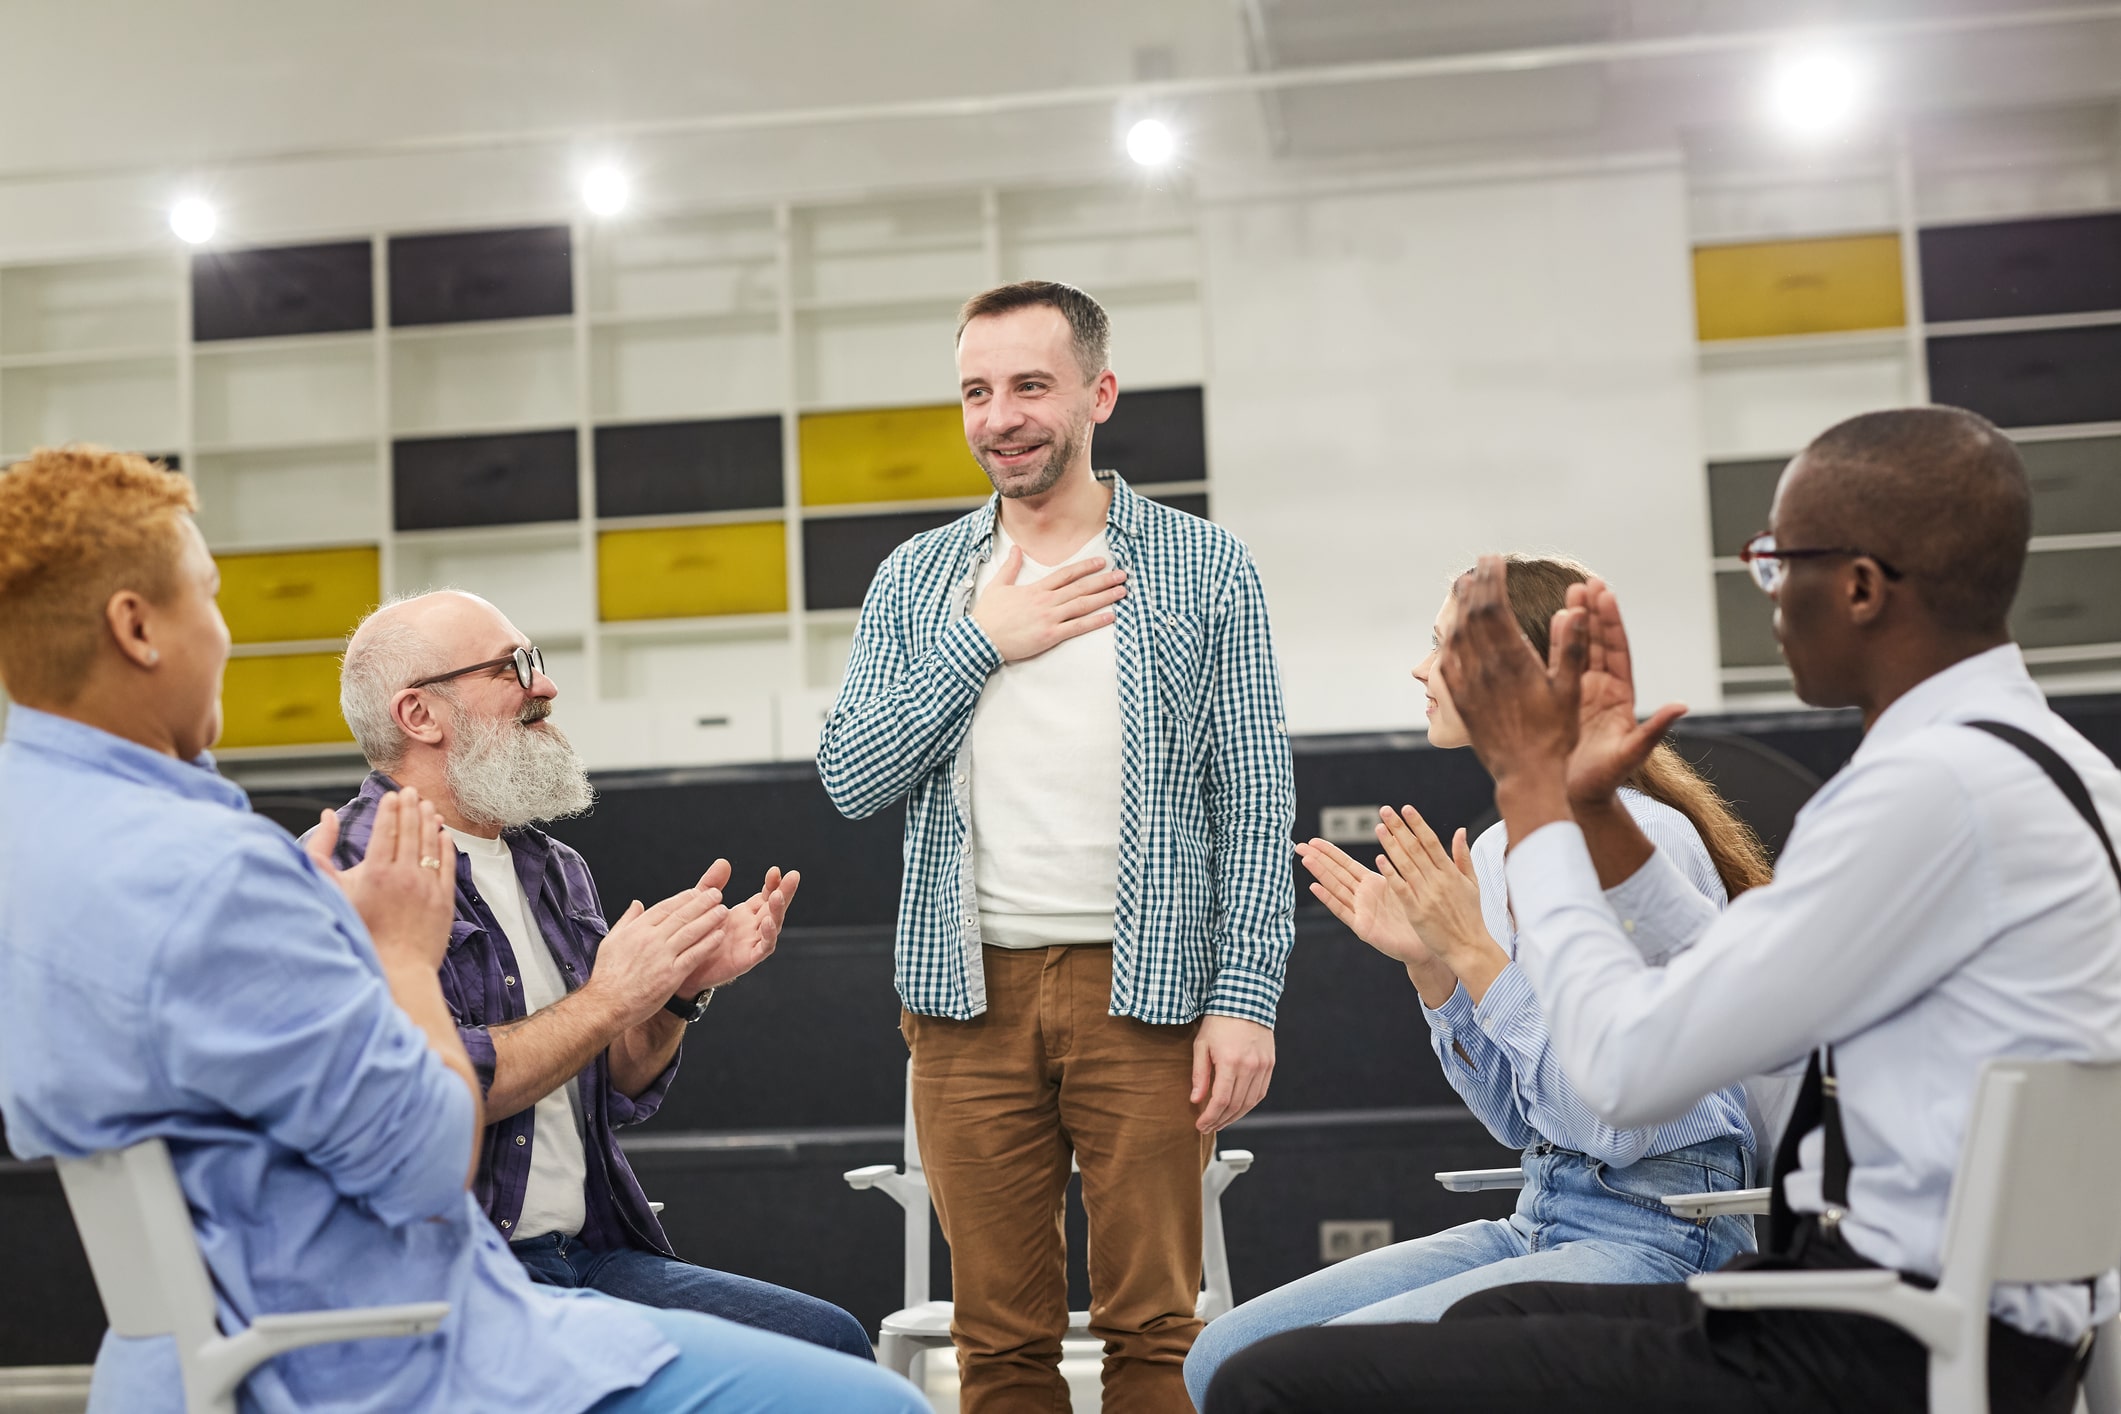 Therapy group applauding man after he told his story